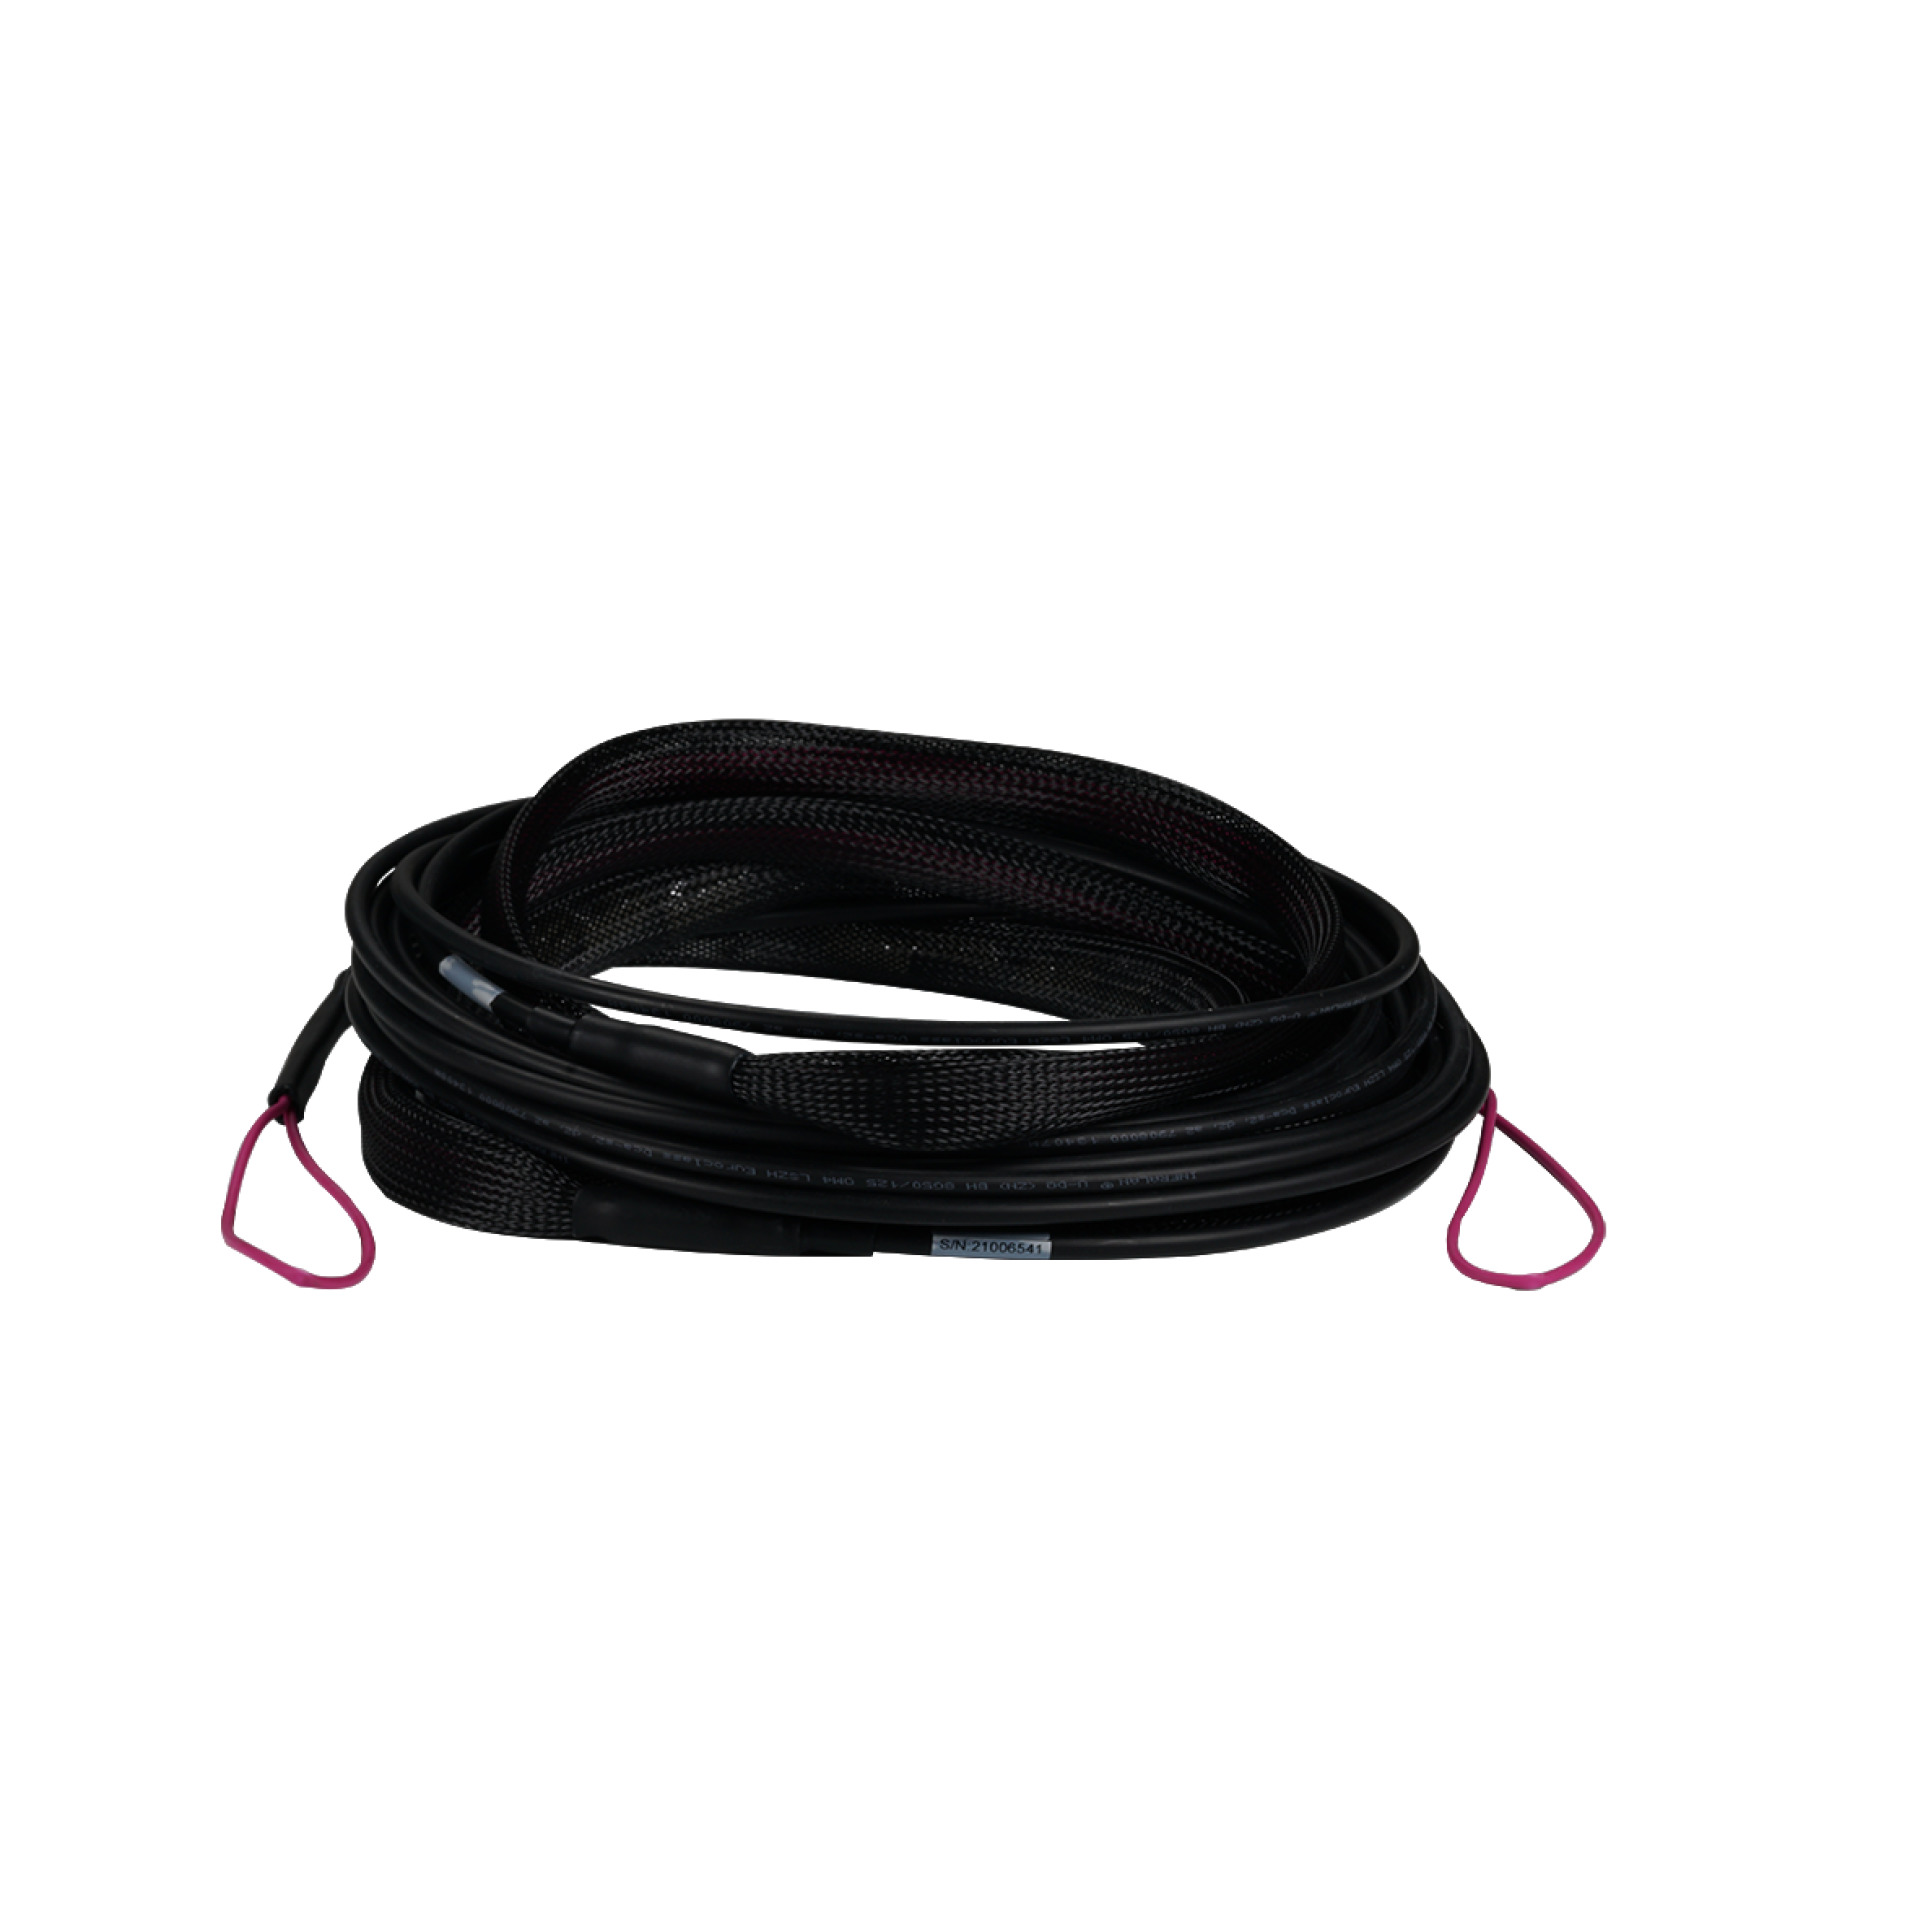 Trunk cable U-DQ(ZN)BH 12G 50/125, SC/SC OM4 90m